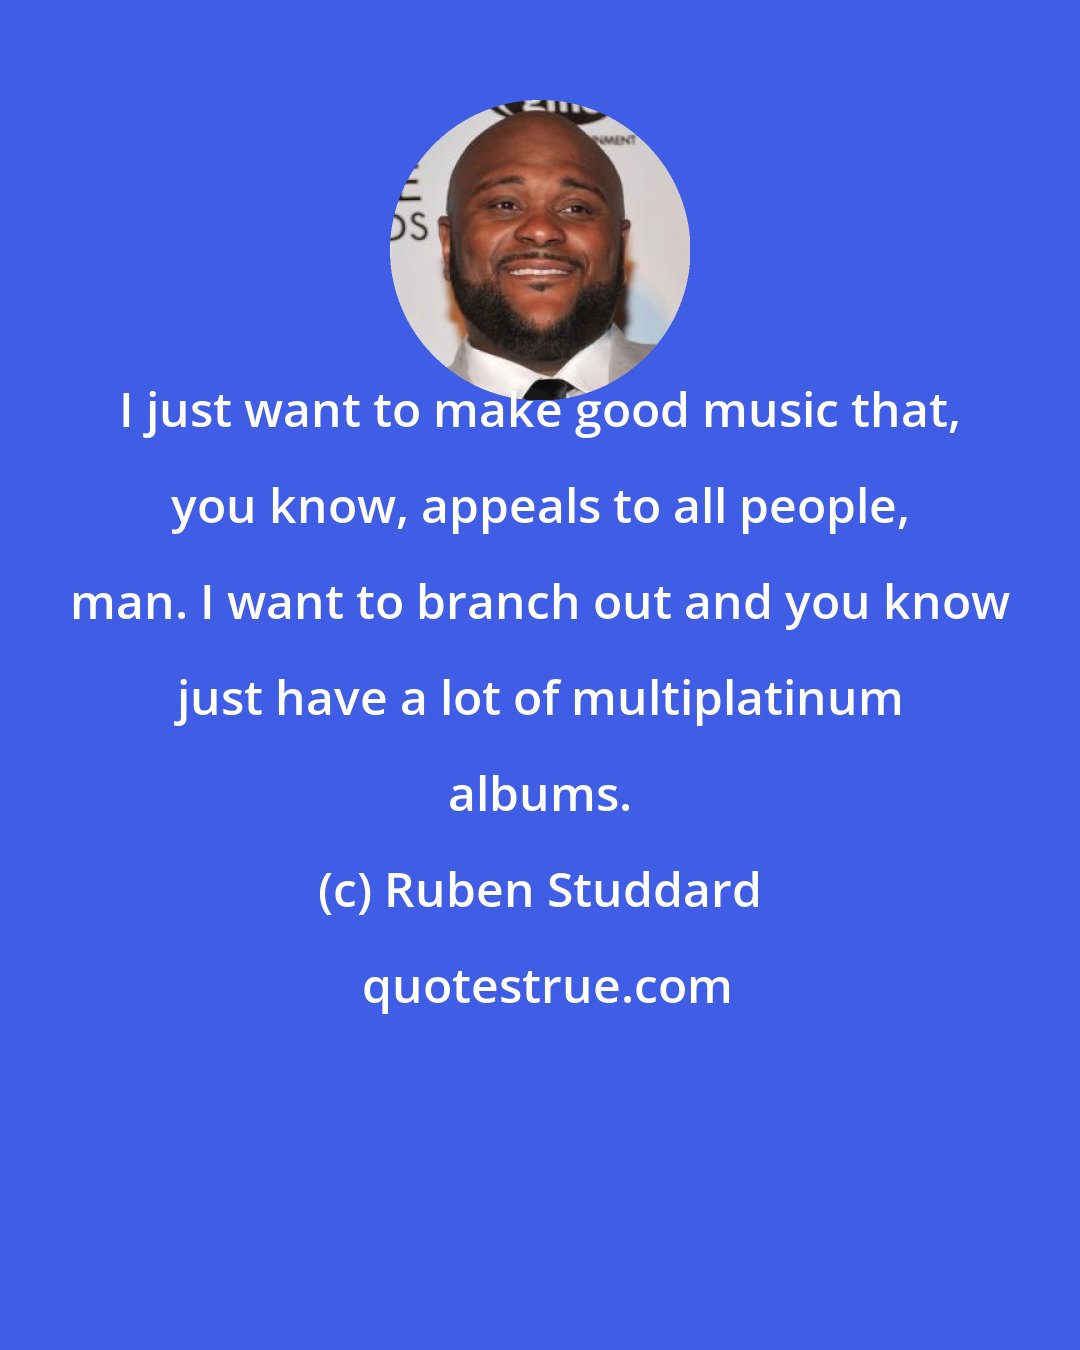 Ruben Studdard: I just want to make good music that, you know, appeals to all people, man. I want to branch out and you know just have a lot of multiplatinum albums.